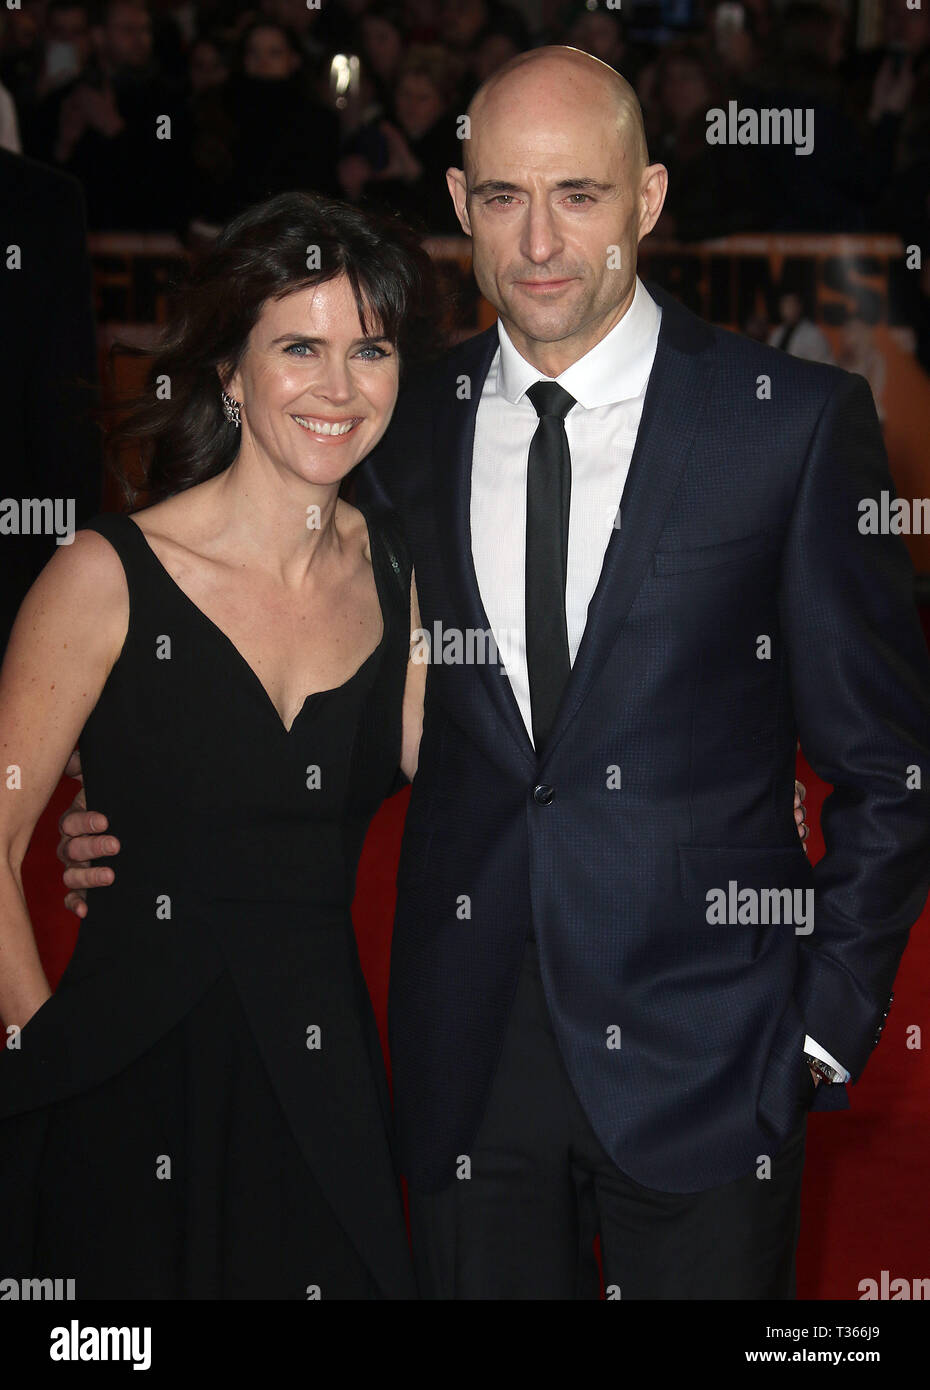 Feb 22, 2016 - London, England, UK - 'Grimsby' World Premiere, Odeon Leicester Square - Red Carpet Arrivals Photo Shows: Liza Marshall, Mark Strong Stock Photo